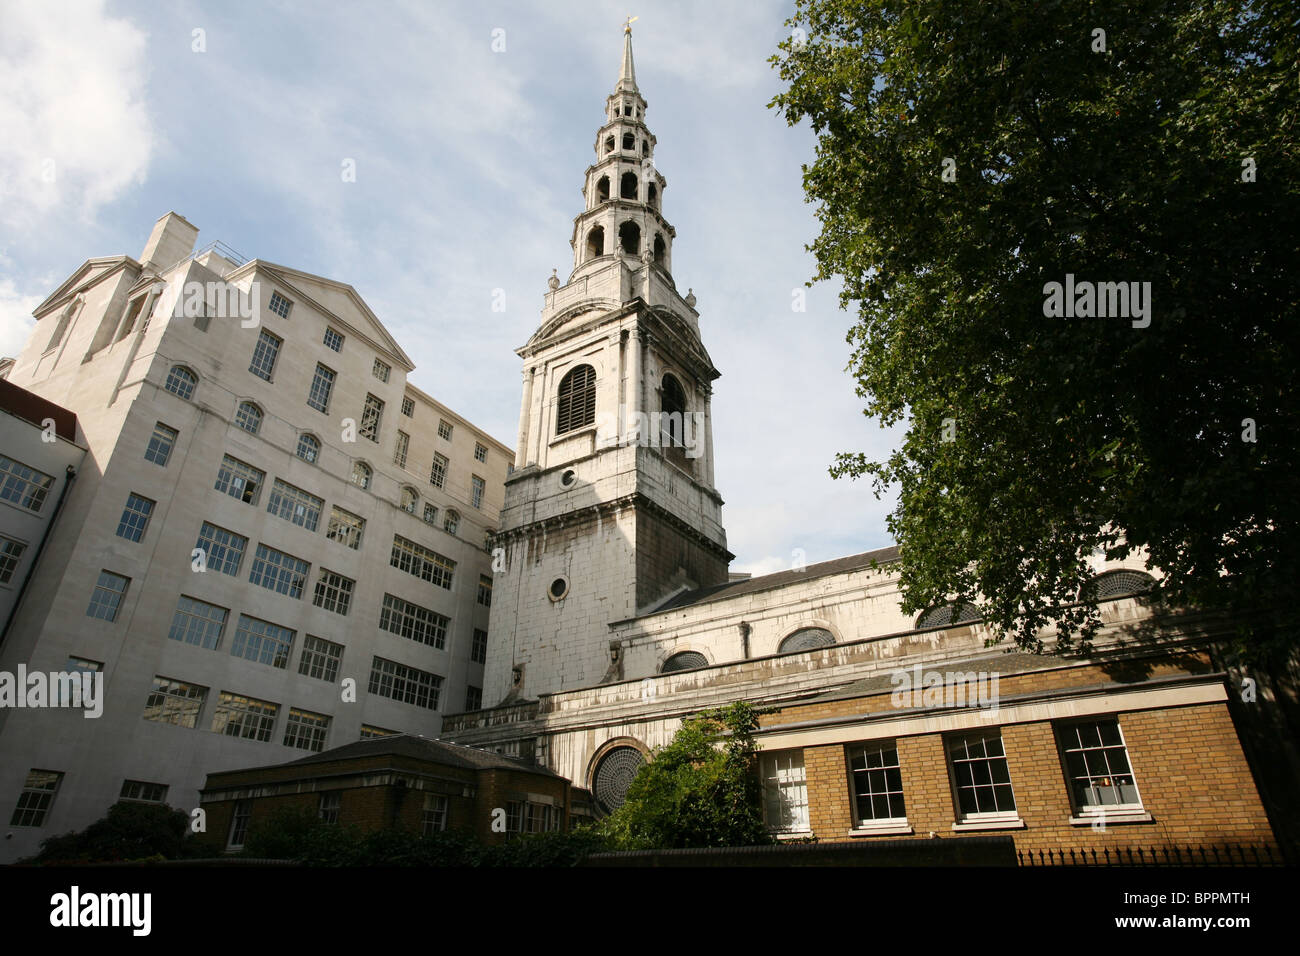 St Bride's Church on Fleet Street in the City of London is the spiritual home of printing and media. Photo:Jeff Gilbert Stock Photo